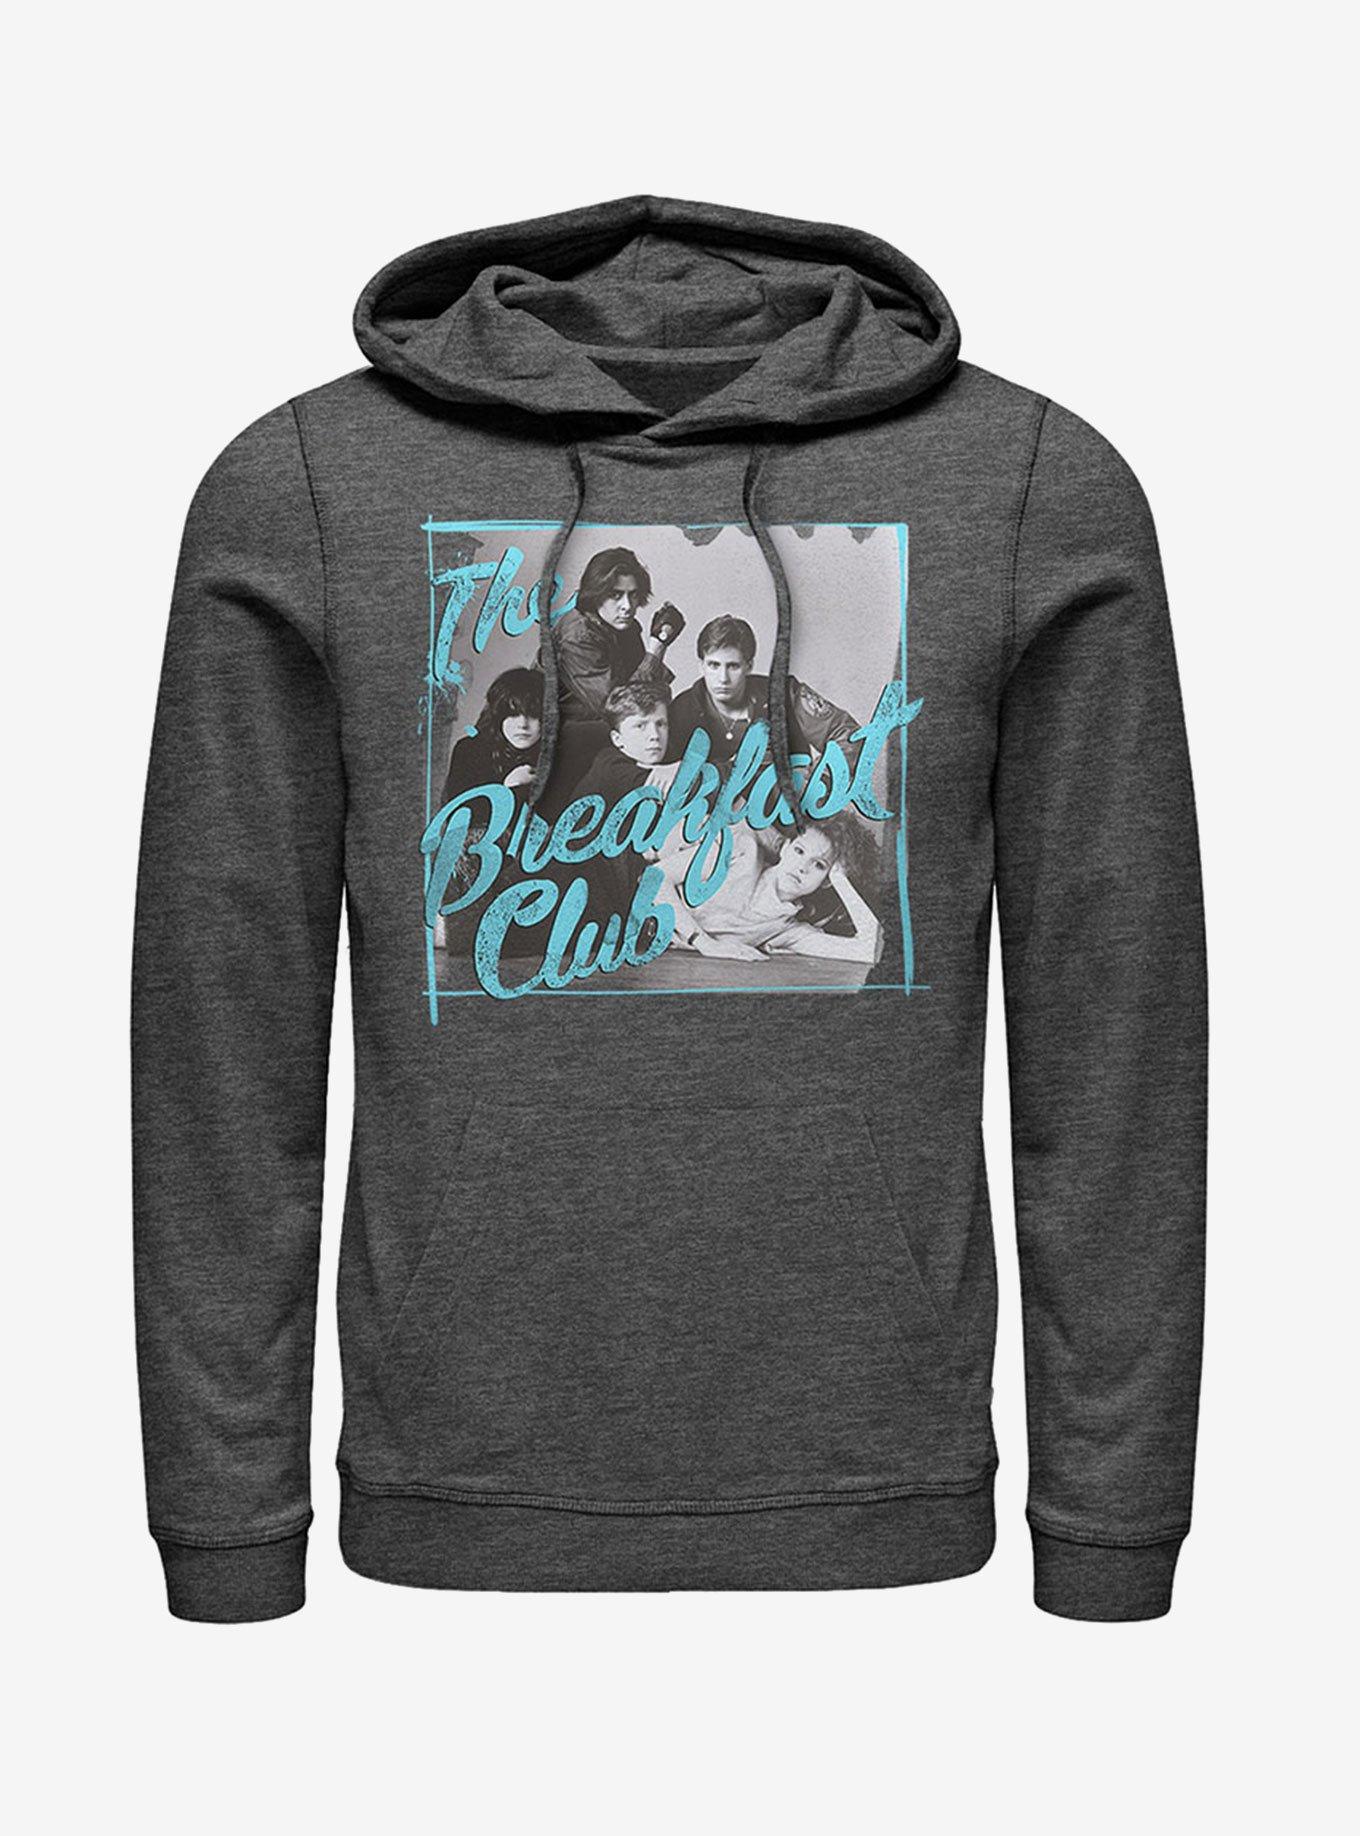 The Breakfast Club Grayscale Character Pose Hoodie